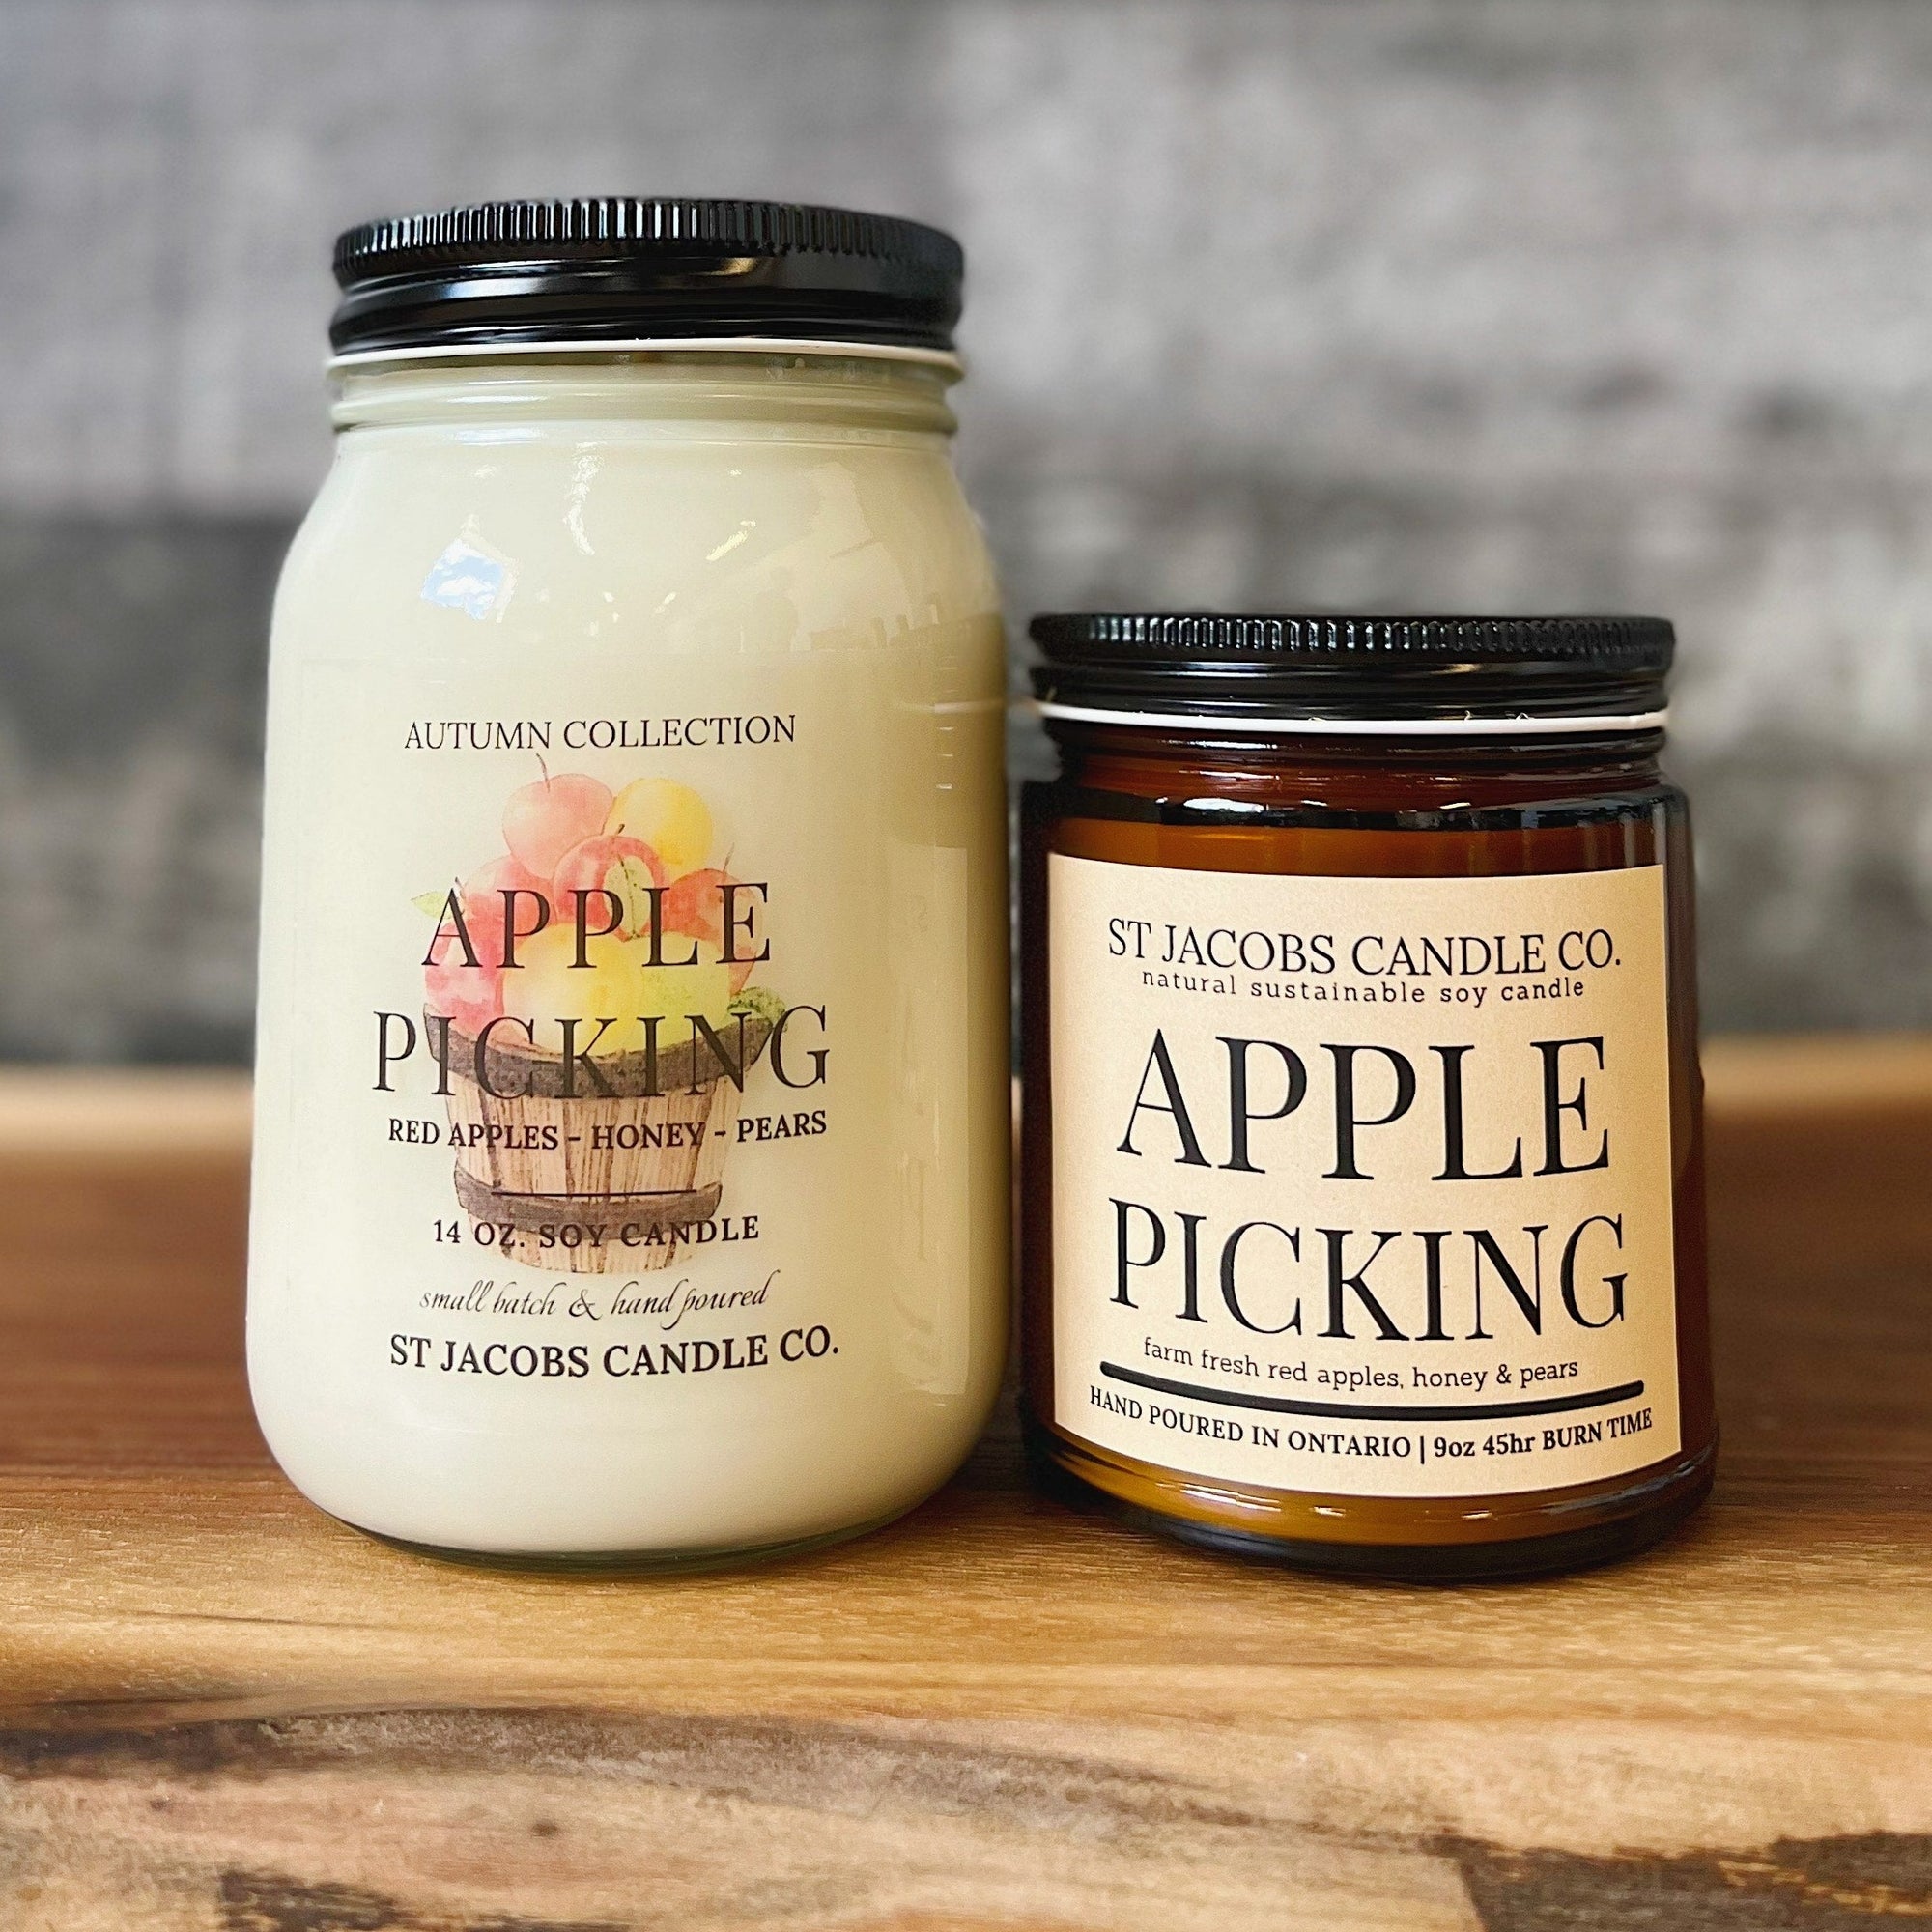 APPLE PICKING 🍂 Autumn 2022 Soy Candle Collection